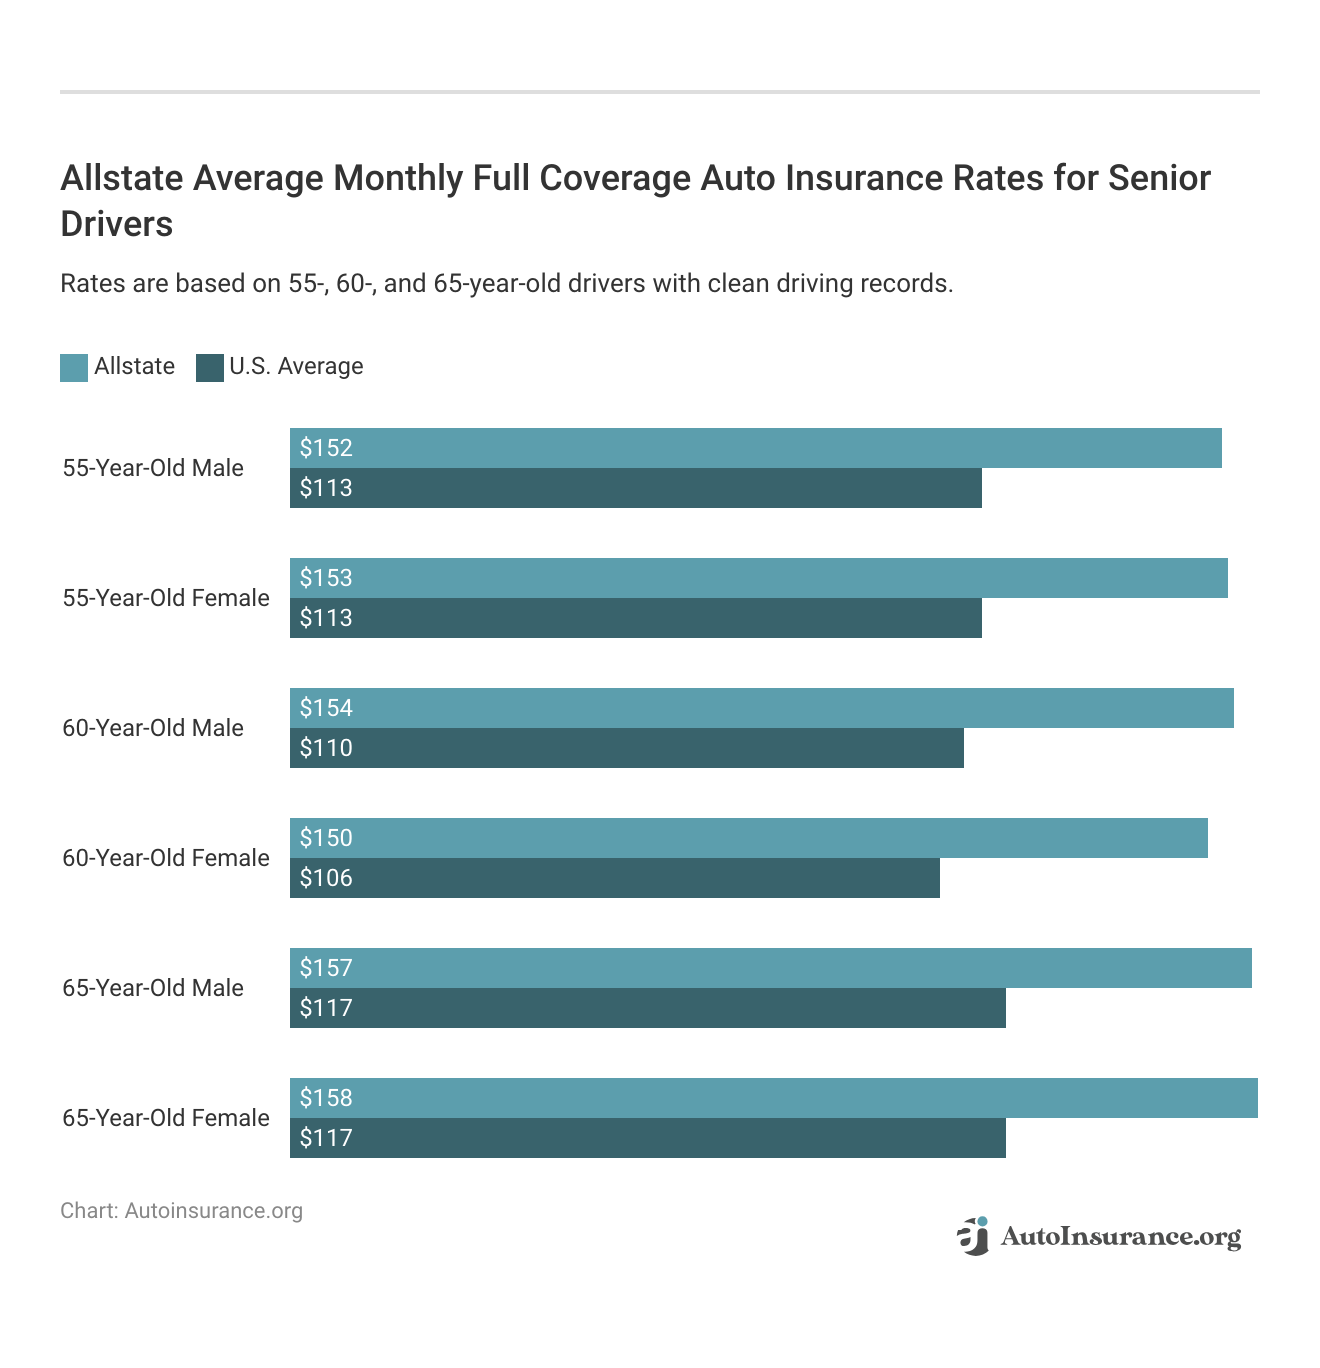 <h3>Allstate Average Monthly Full Coverage Auto Insurance Rates for Senior Drivers</h3>